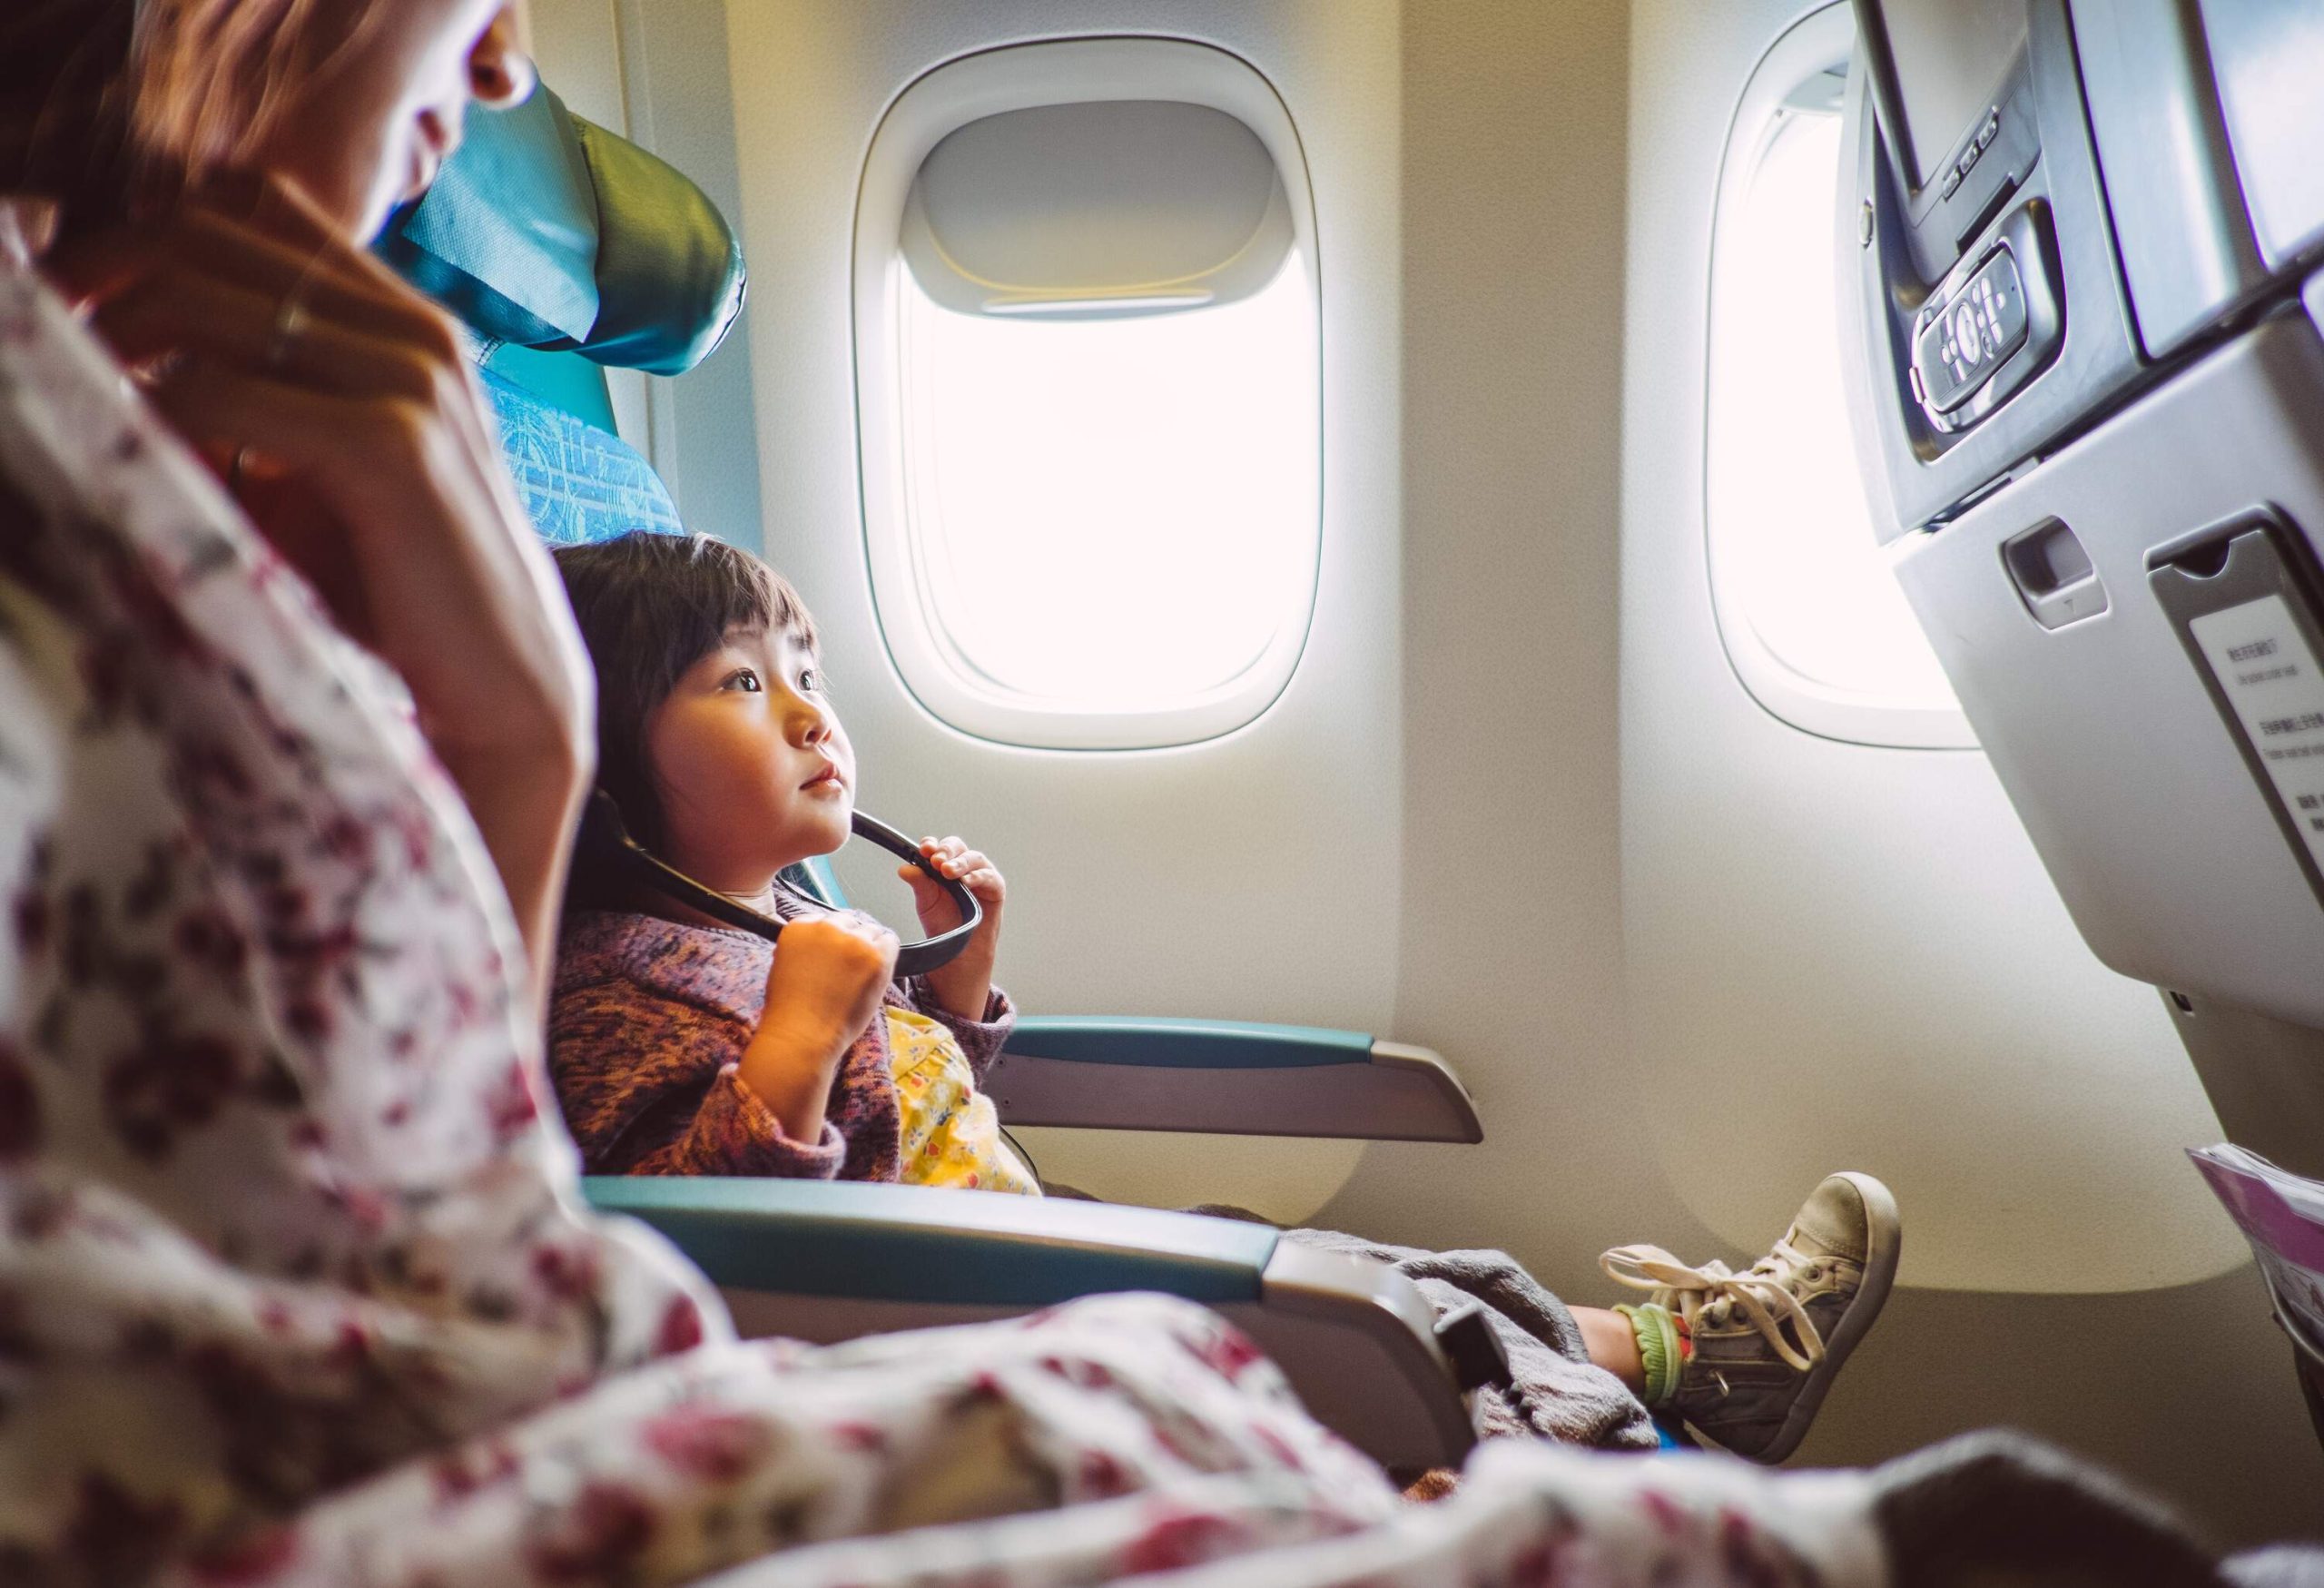 A little girl sitting next to her mother watching PTV on an airplane.